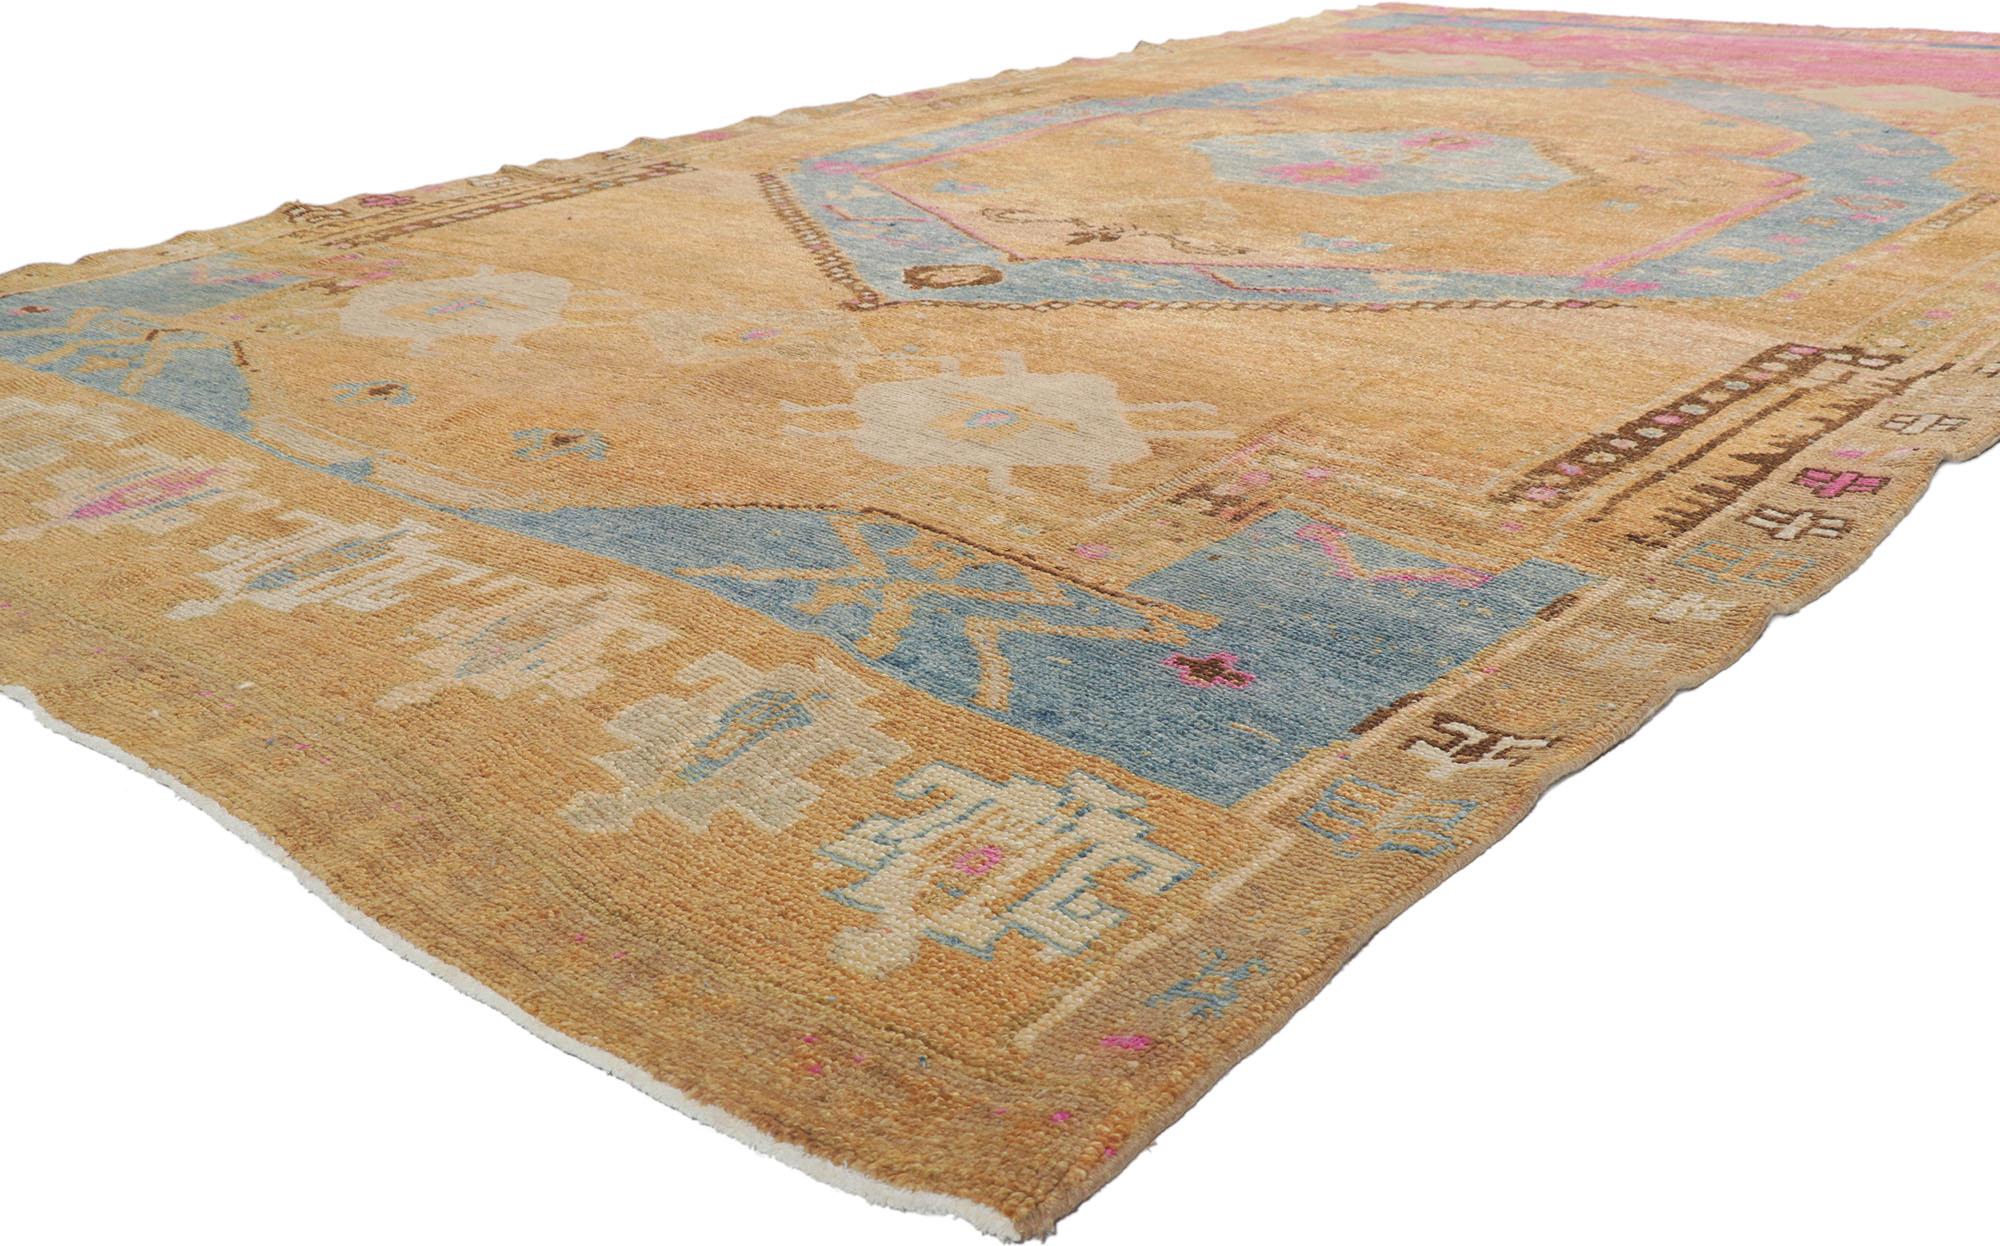 53787 Vintage Turkish Oushak Rug, 07'06 x 13'08.
Global Chic meets colorfully curated in this hand knotted wool vintage Turkish Ouhak rug. Prepare to be transported to a mystical realm of Anatolian wonder summoning visions of ancient enchantments